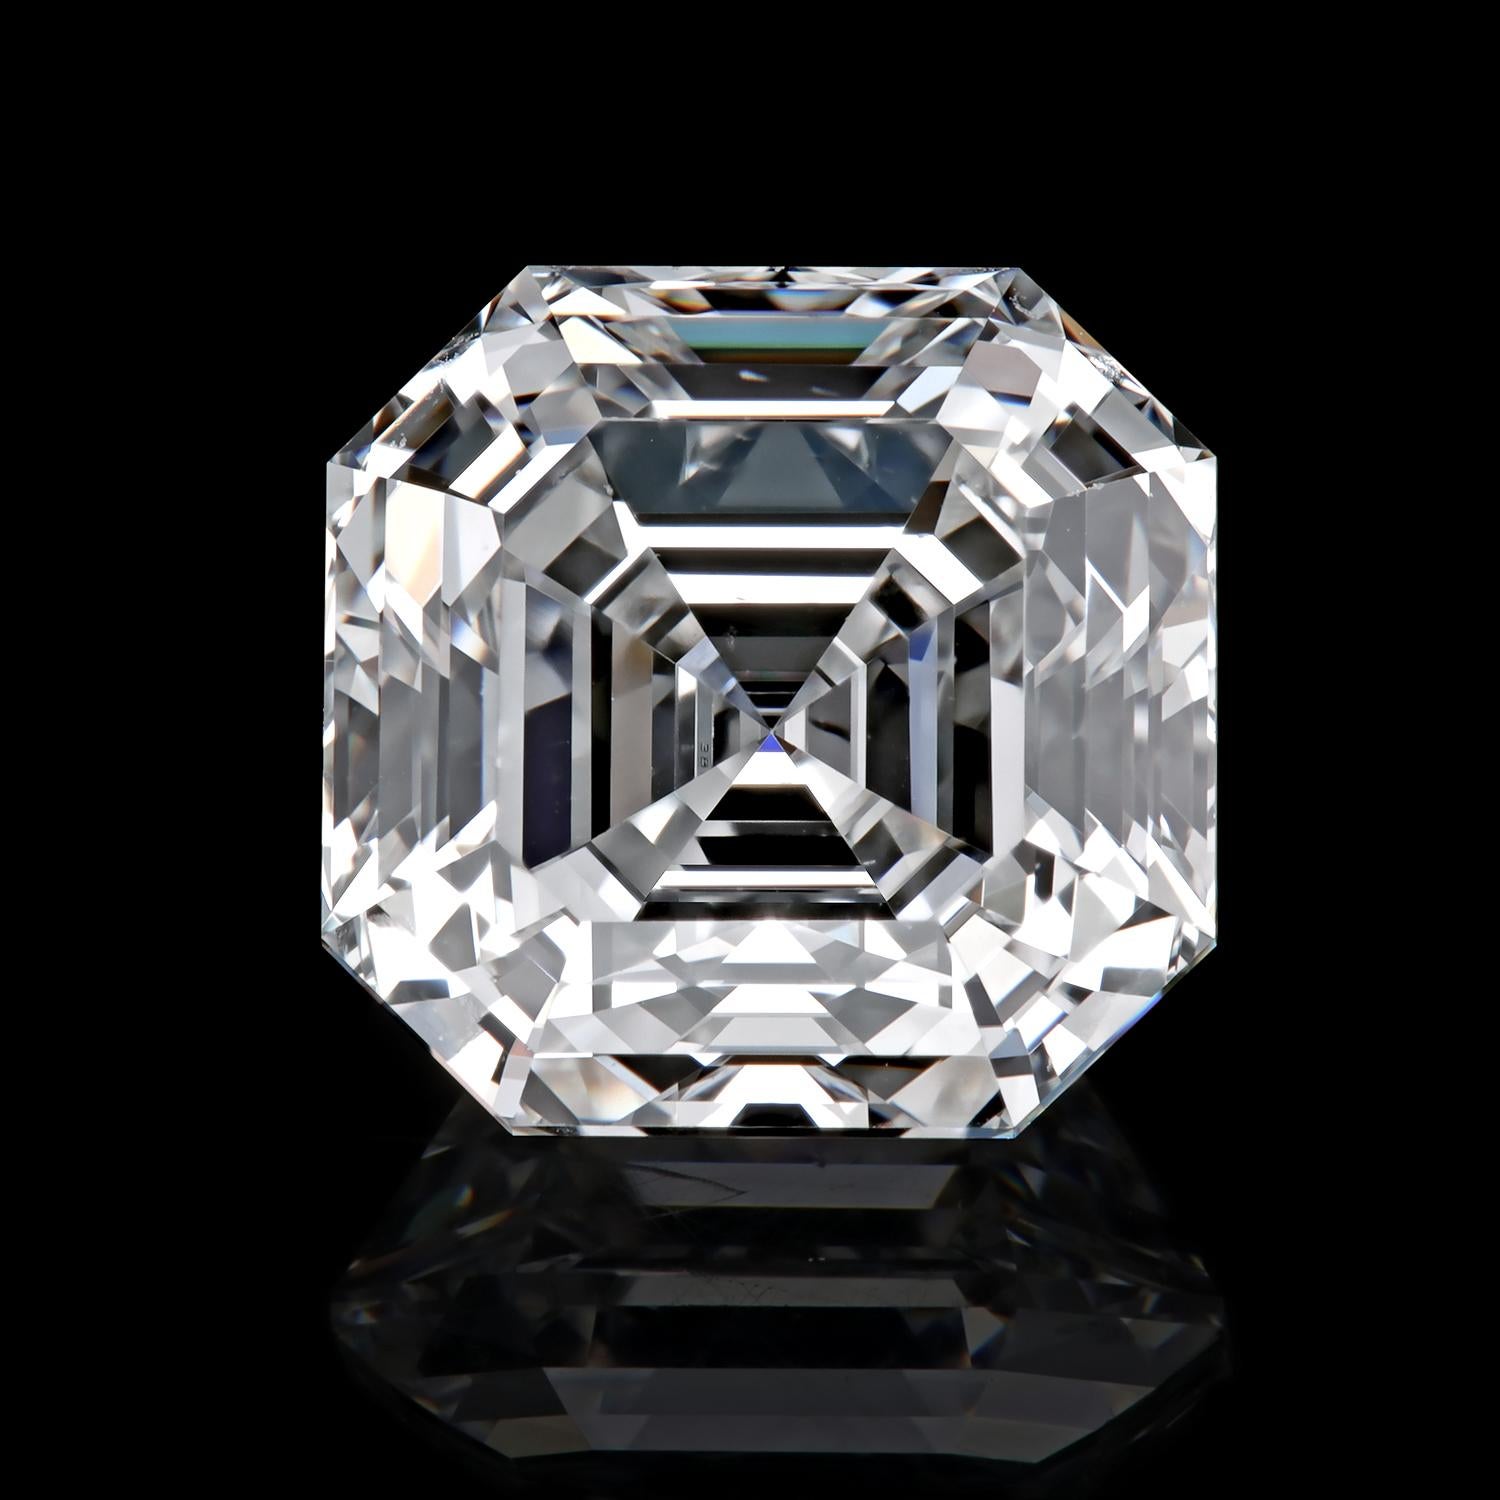 Stunning True Antique™ Asscher cut diamond 1.83 ct F/VS1; GIA 12323397.

The stone is loose, but Leon Mege custom jewelers will happily work with you on a custom mounting, subject to an additional charge. Please reach out to us to explore all